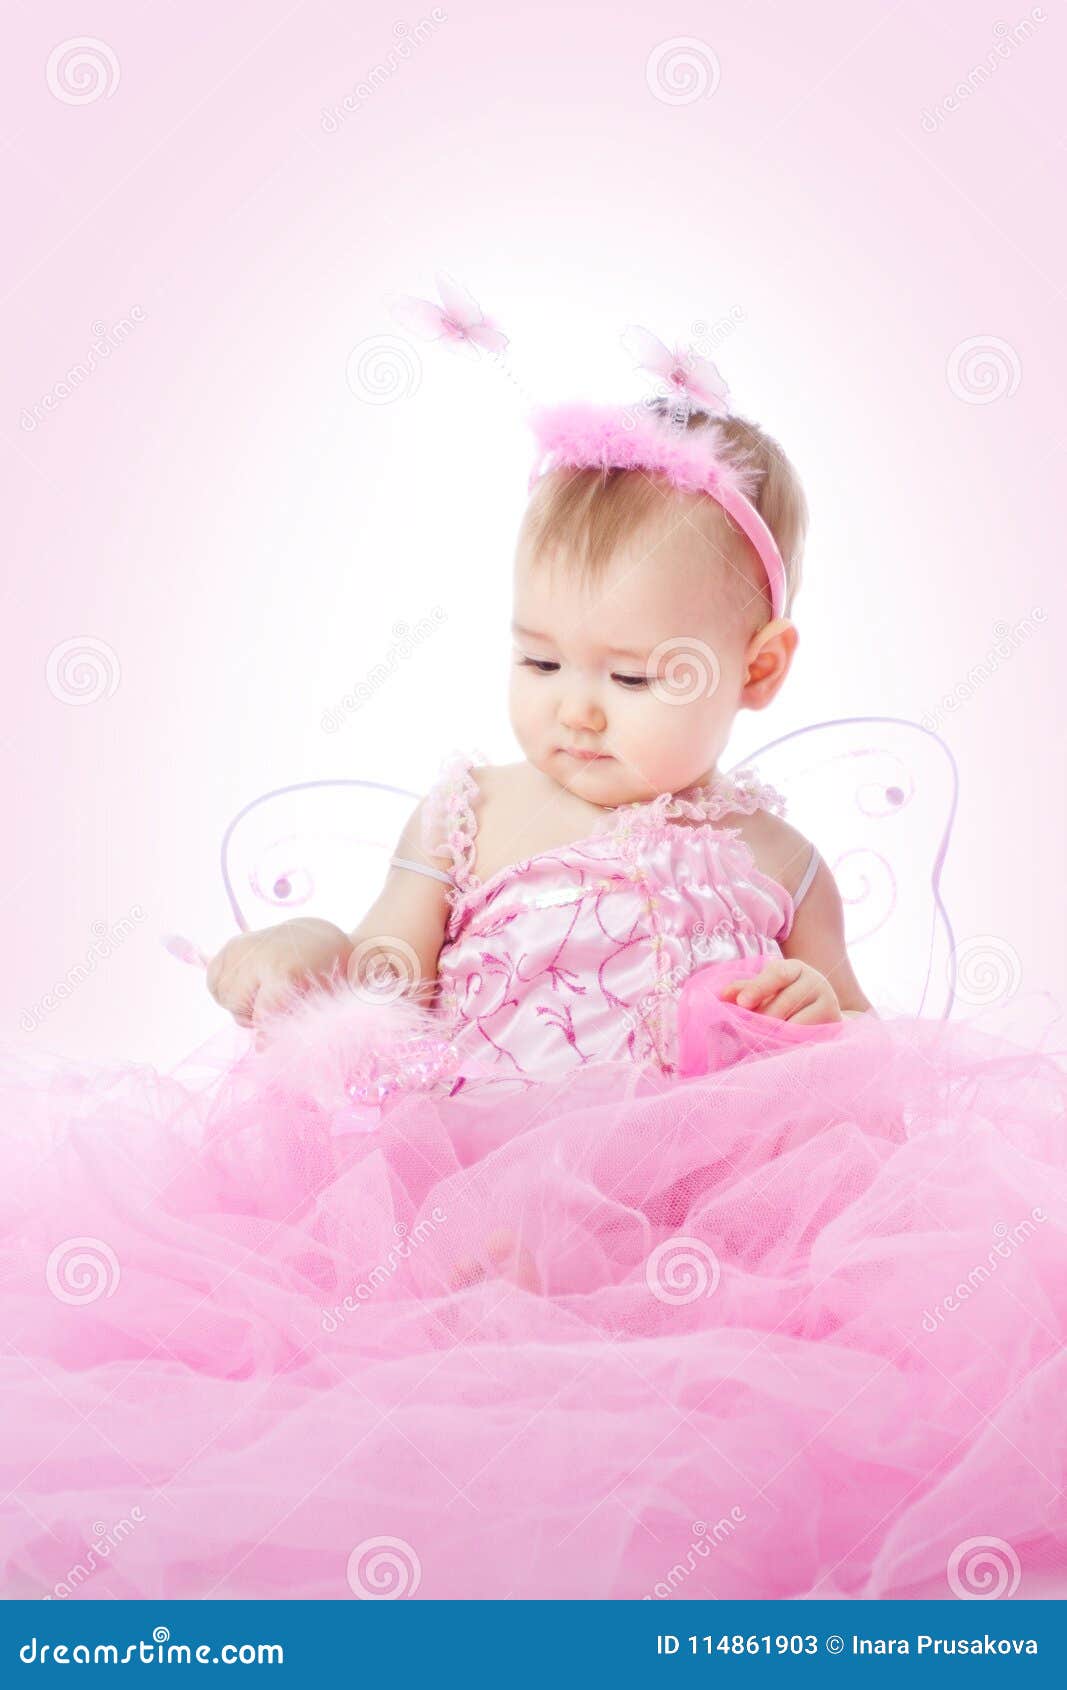 pink dress for baby